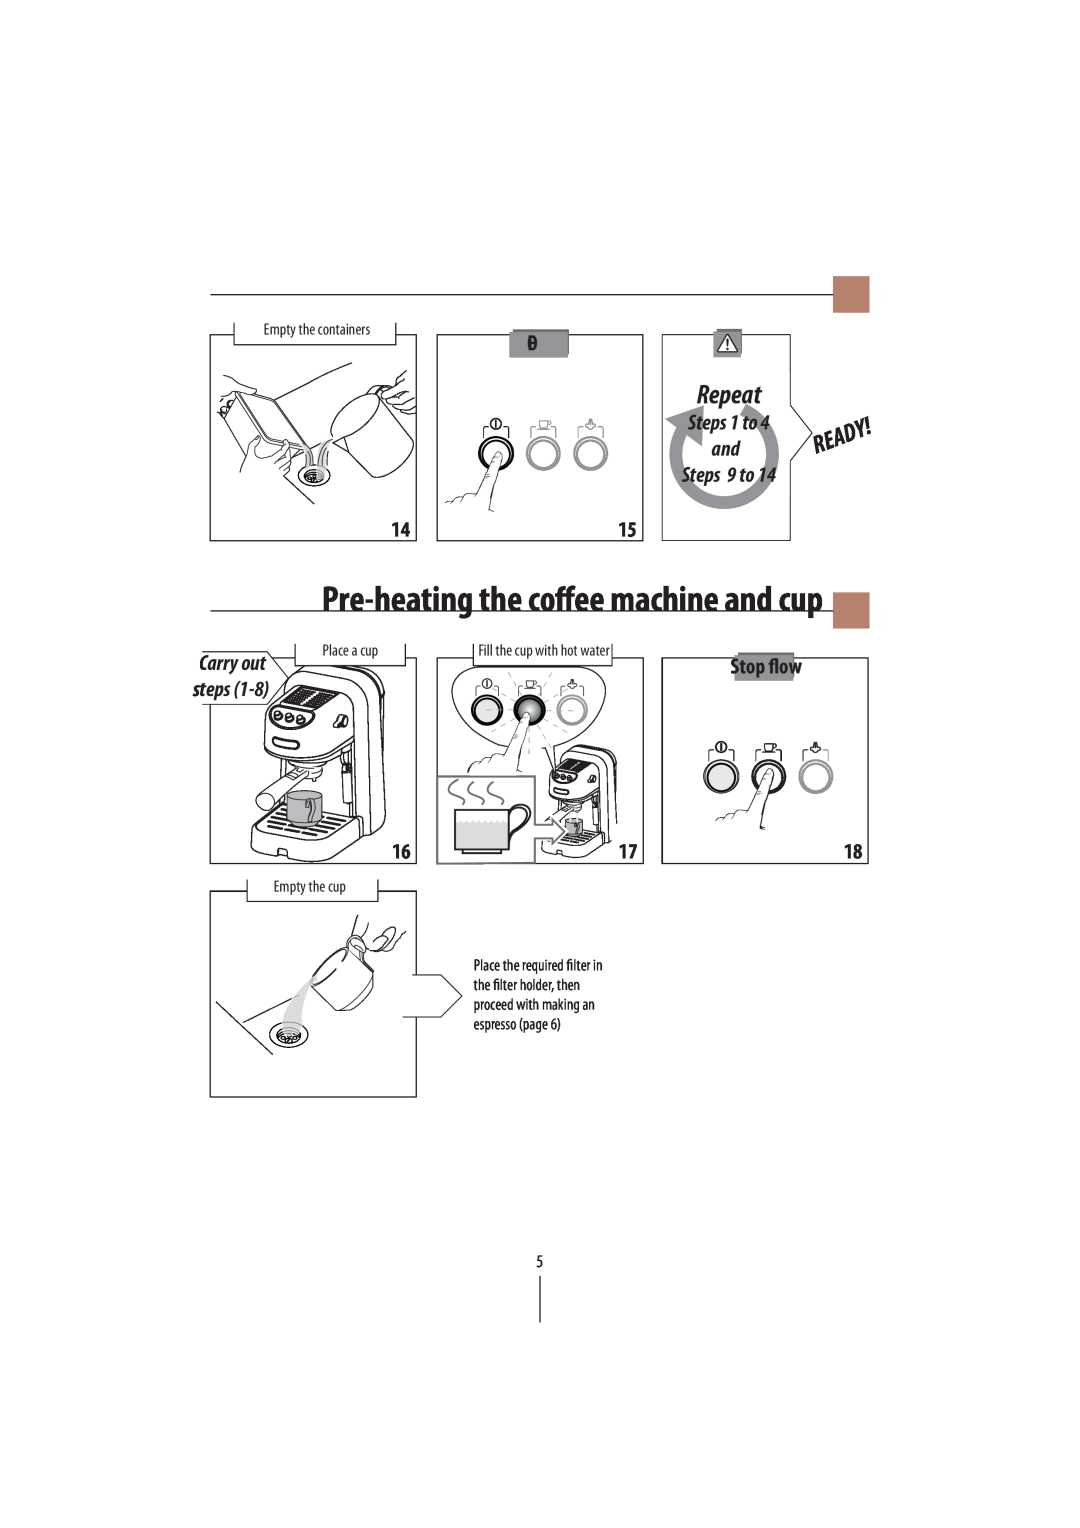 DeLonghi EC250 manual Pre-heating the coffee machine and cup, Repeat, Steps 1 to and Steps 9 to, 1415, Carry out, steps 